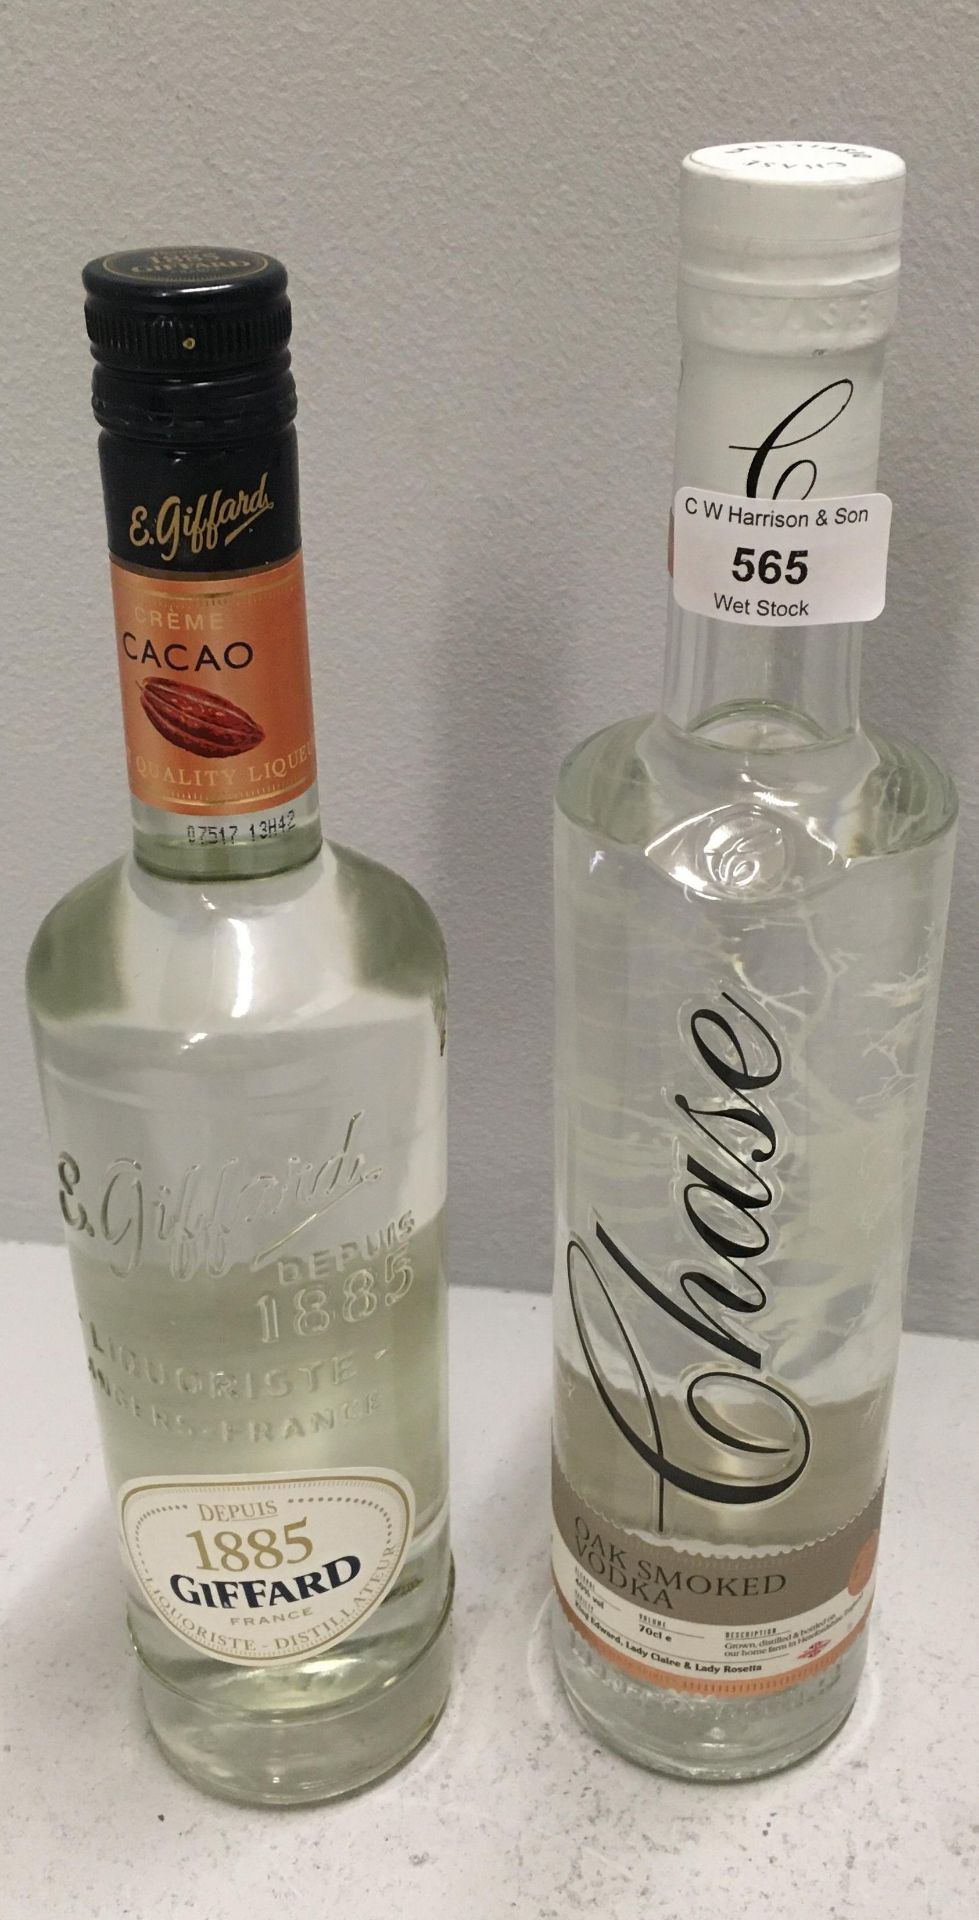 2 x items - 1 x 700ml bottle of Gifford Creme de cacao liqueur and 1 x 70cl bottle of Chase Oak